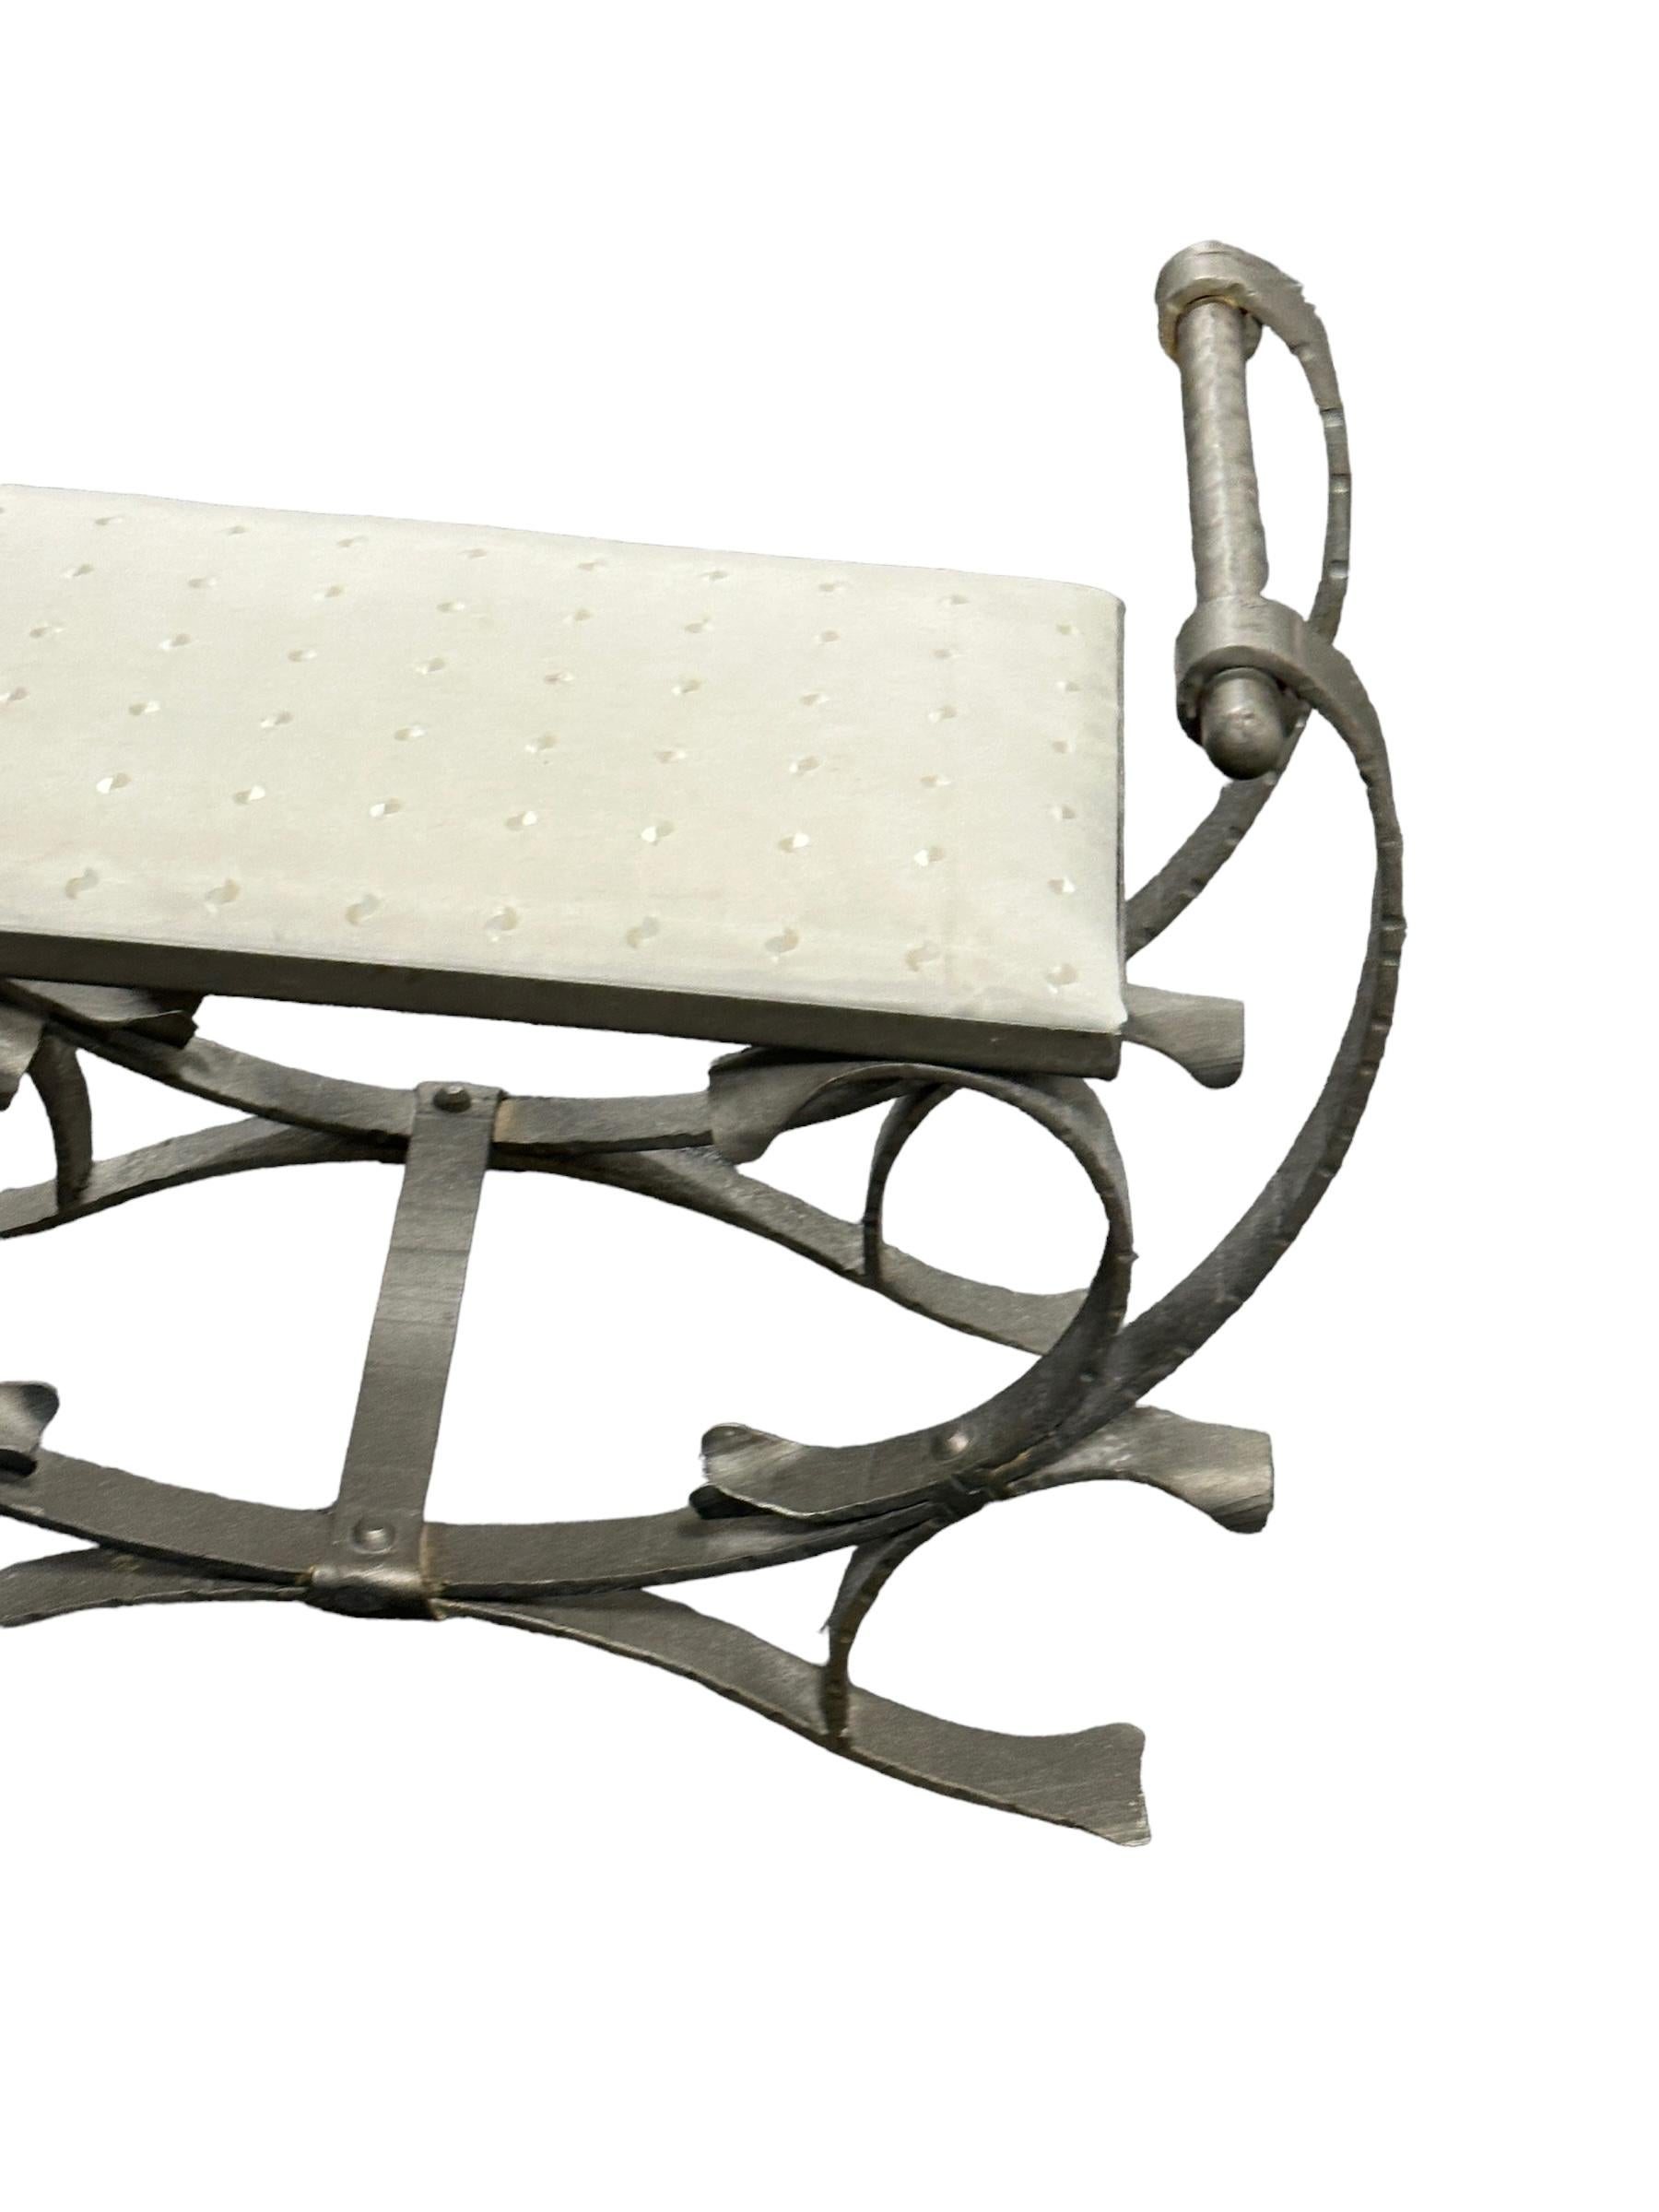 Silver Wrought Iron with Satin Cushion Seat, Stool or Bench Italy, 1960s For Sale 3